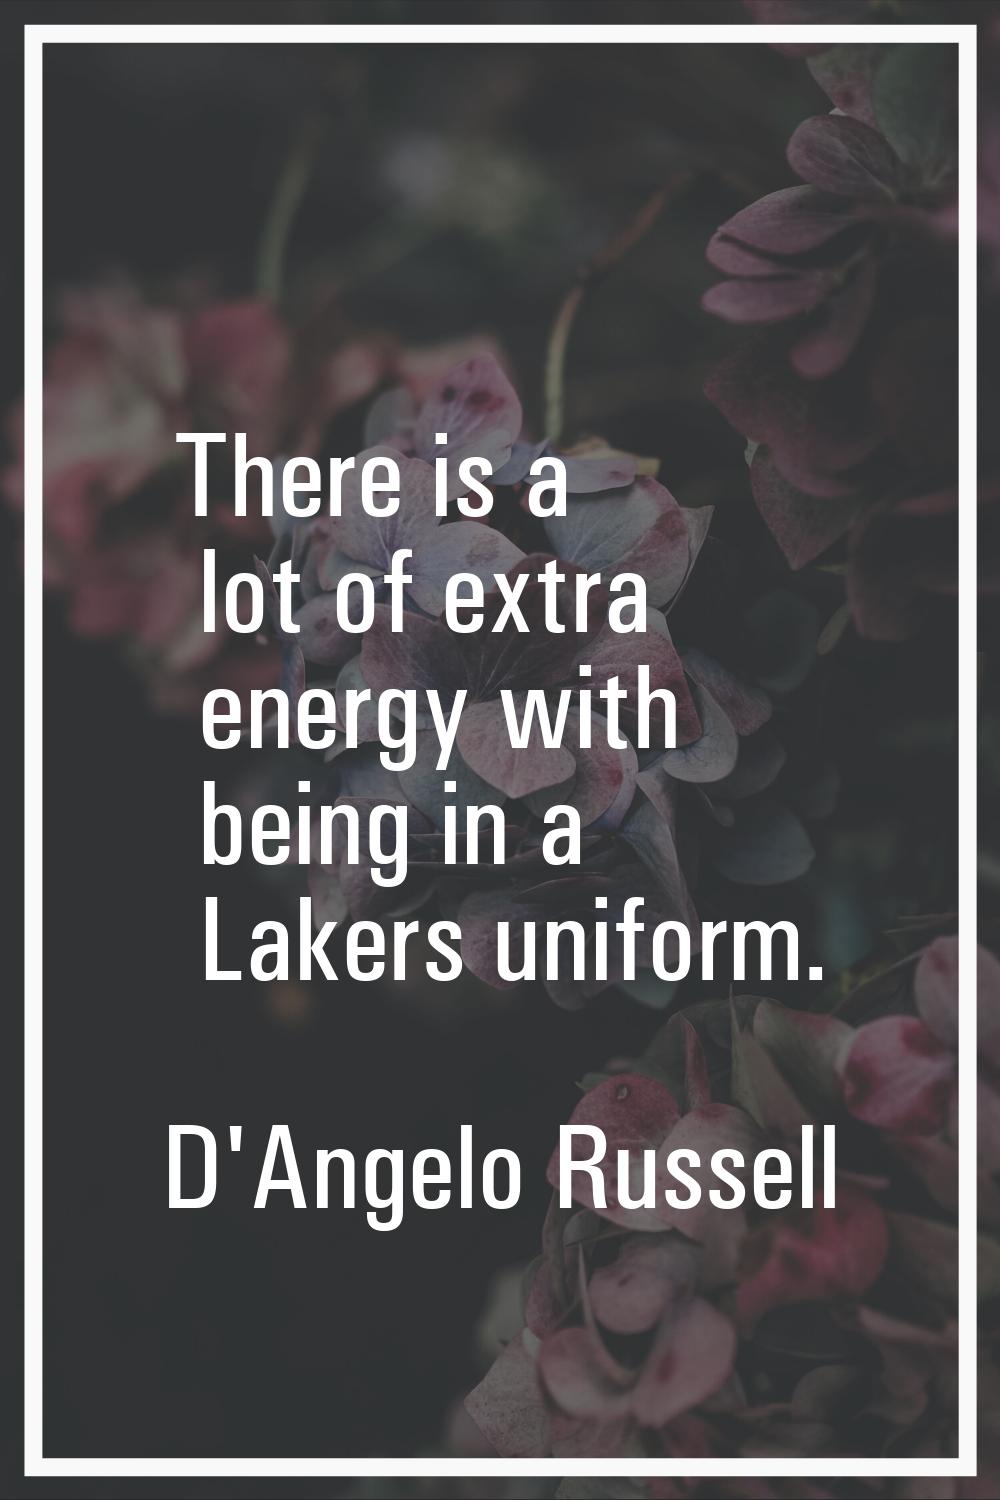 There is a lot of extra energy with being in a Lakers uniform.